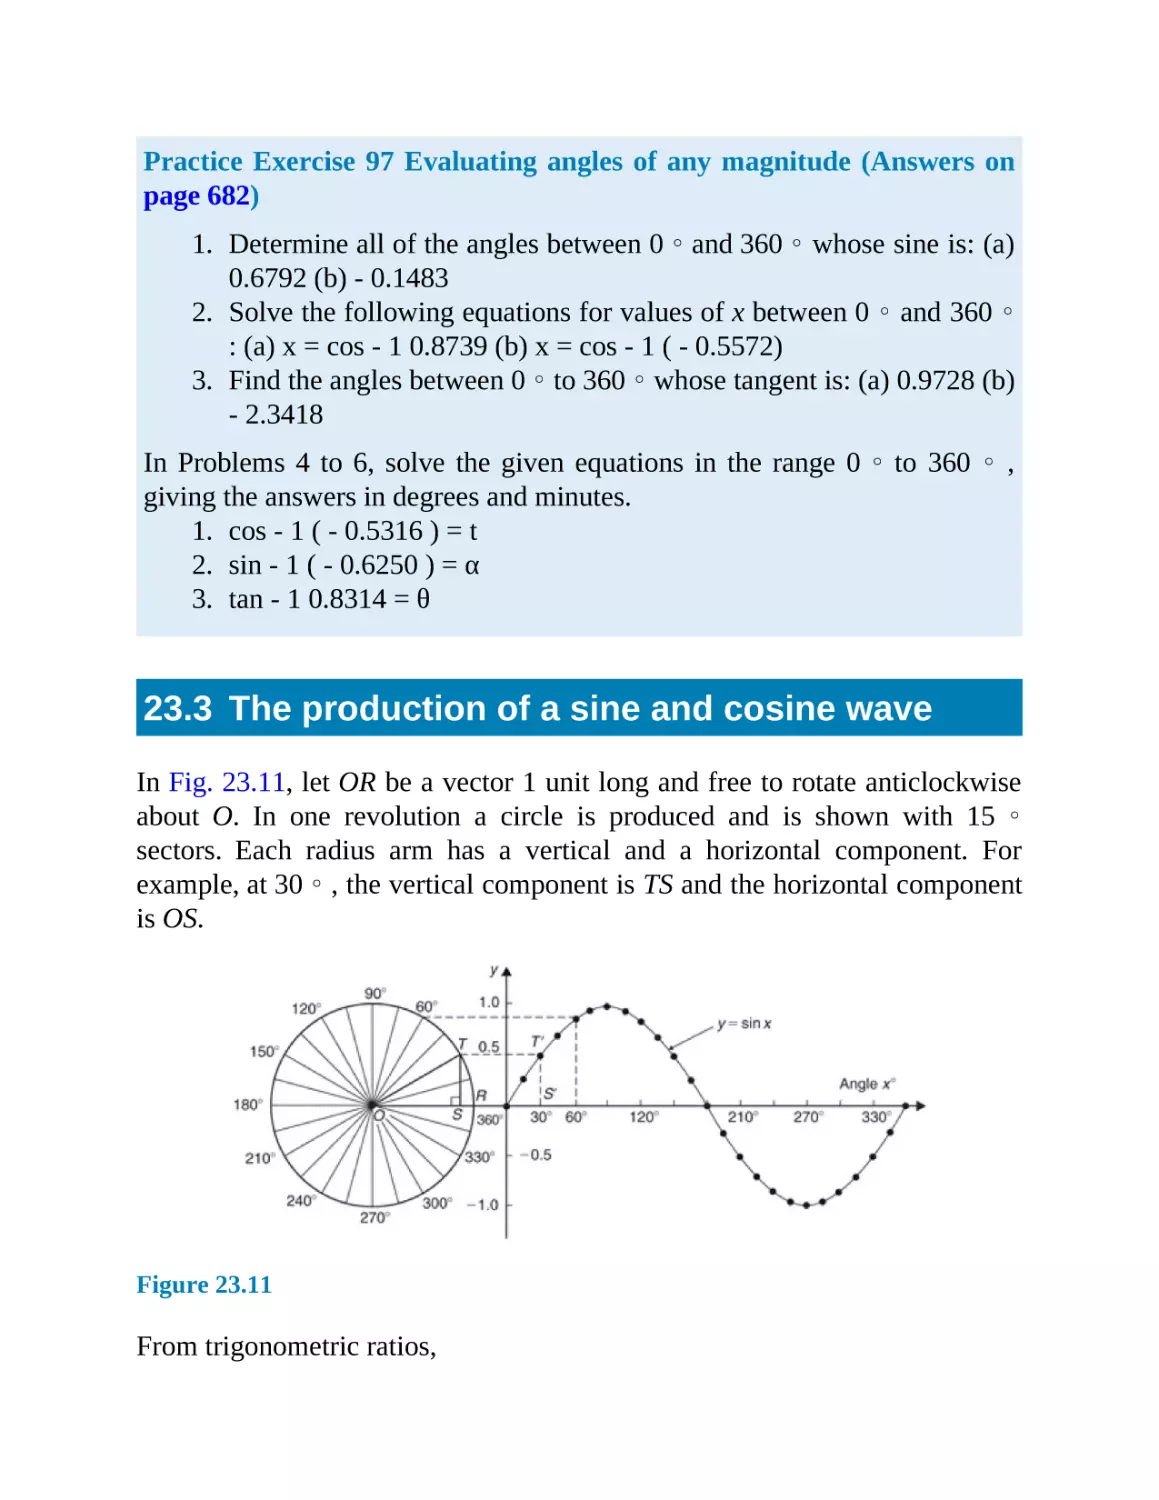 23.3 The production of a sine and cosine wave